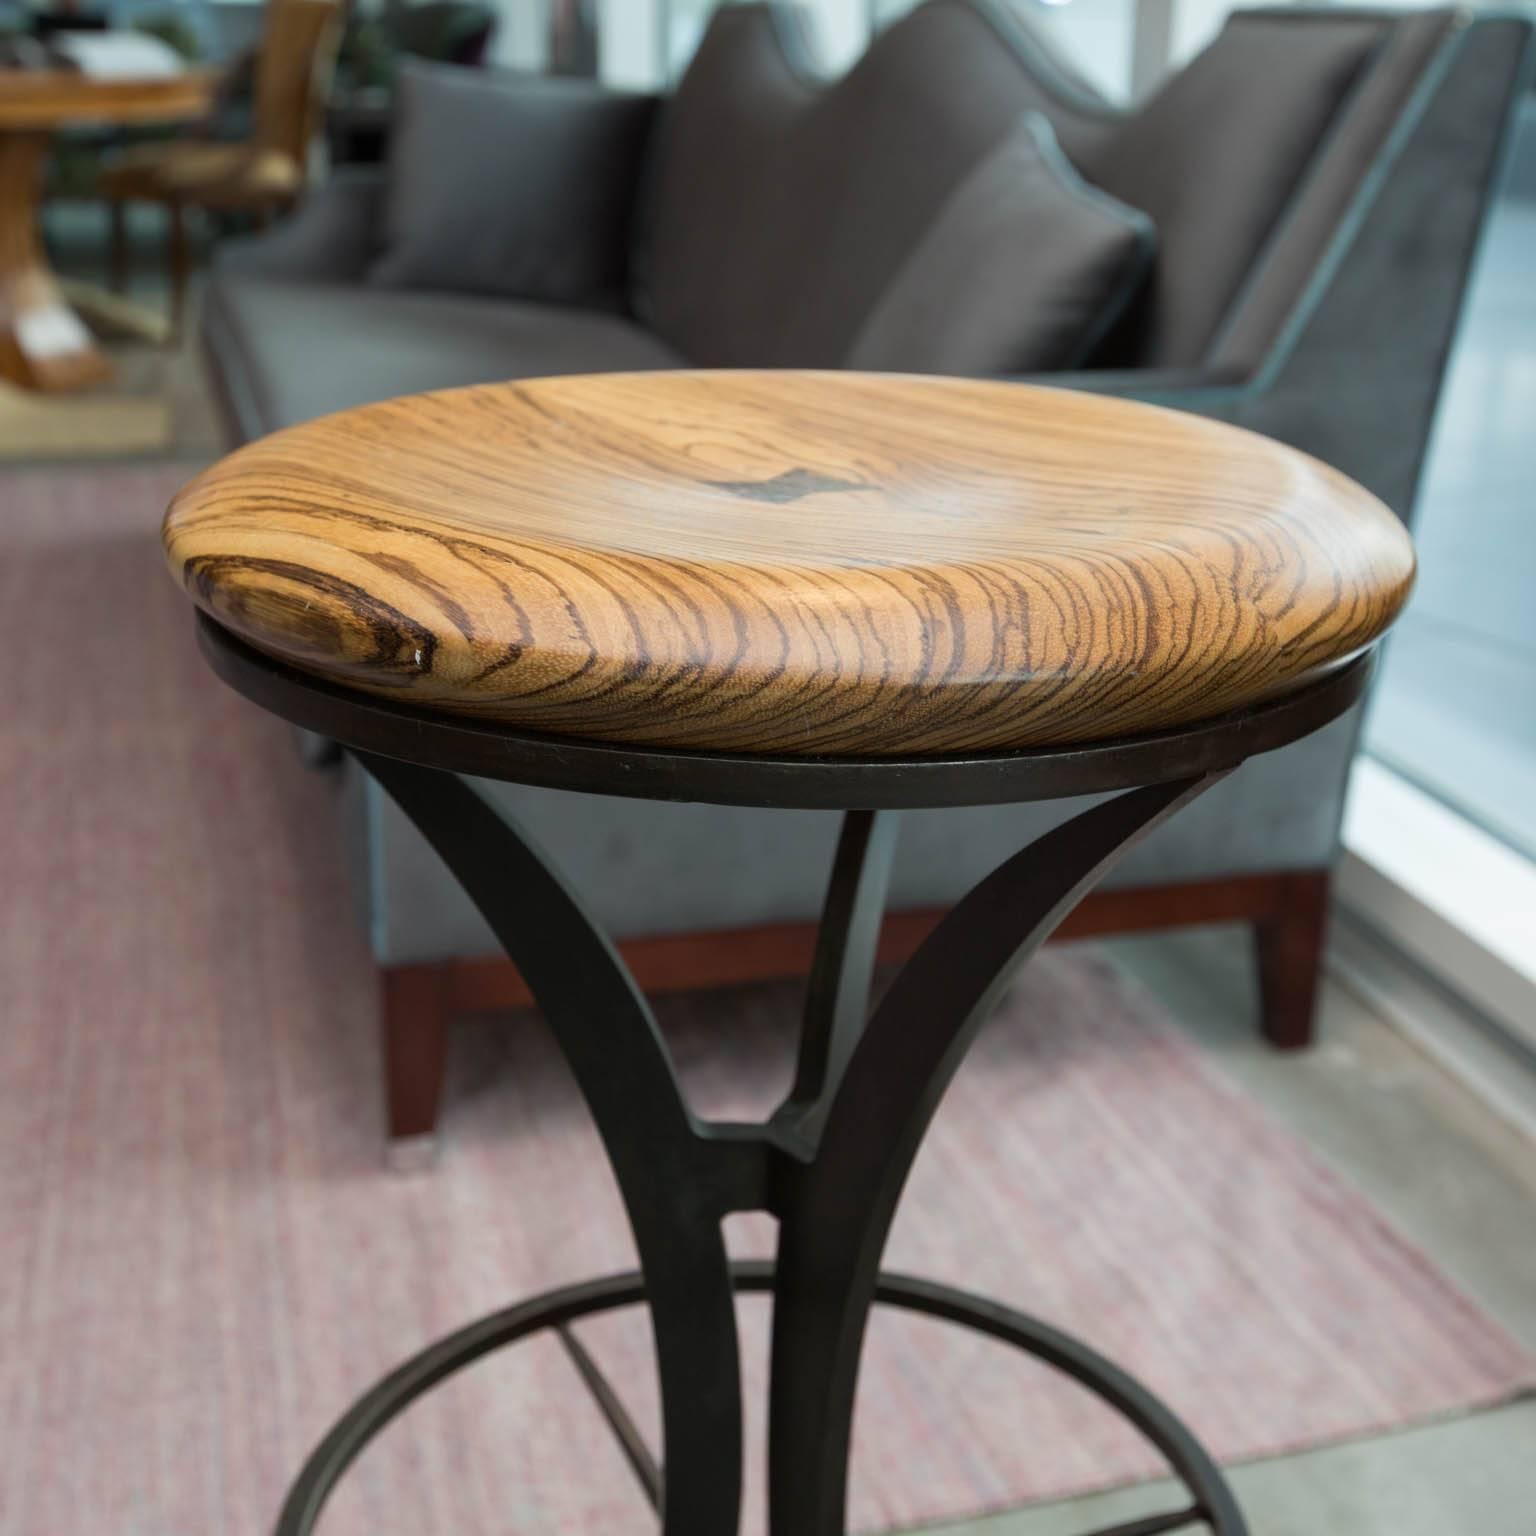 Patinated Zebrawood and Forged Steel Bar Stools by Gregory Clark